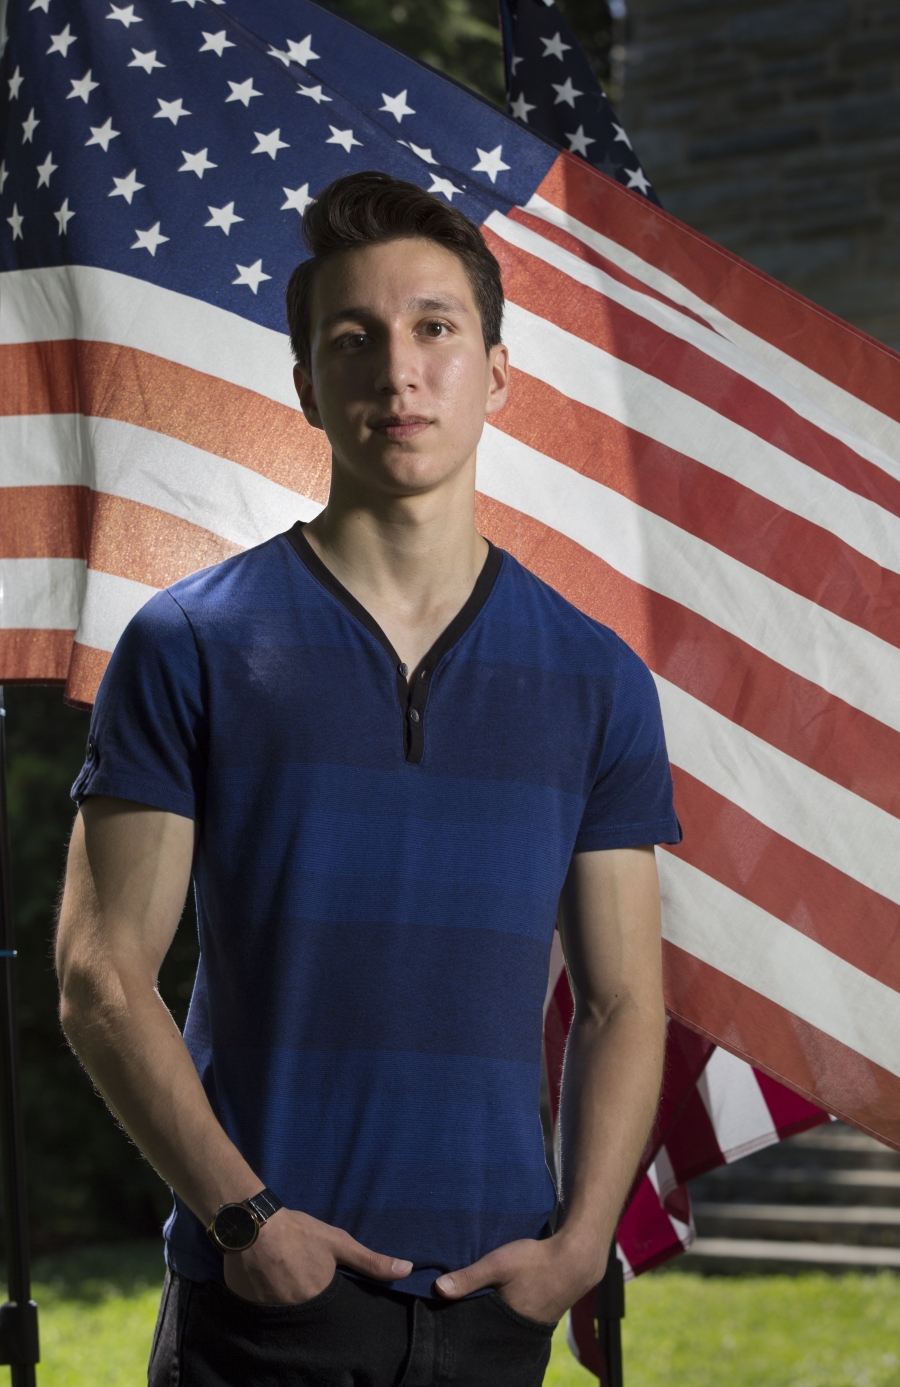 a young man in a blue shirt stands in front of an American flag